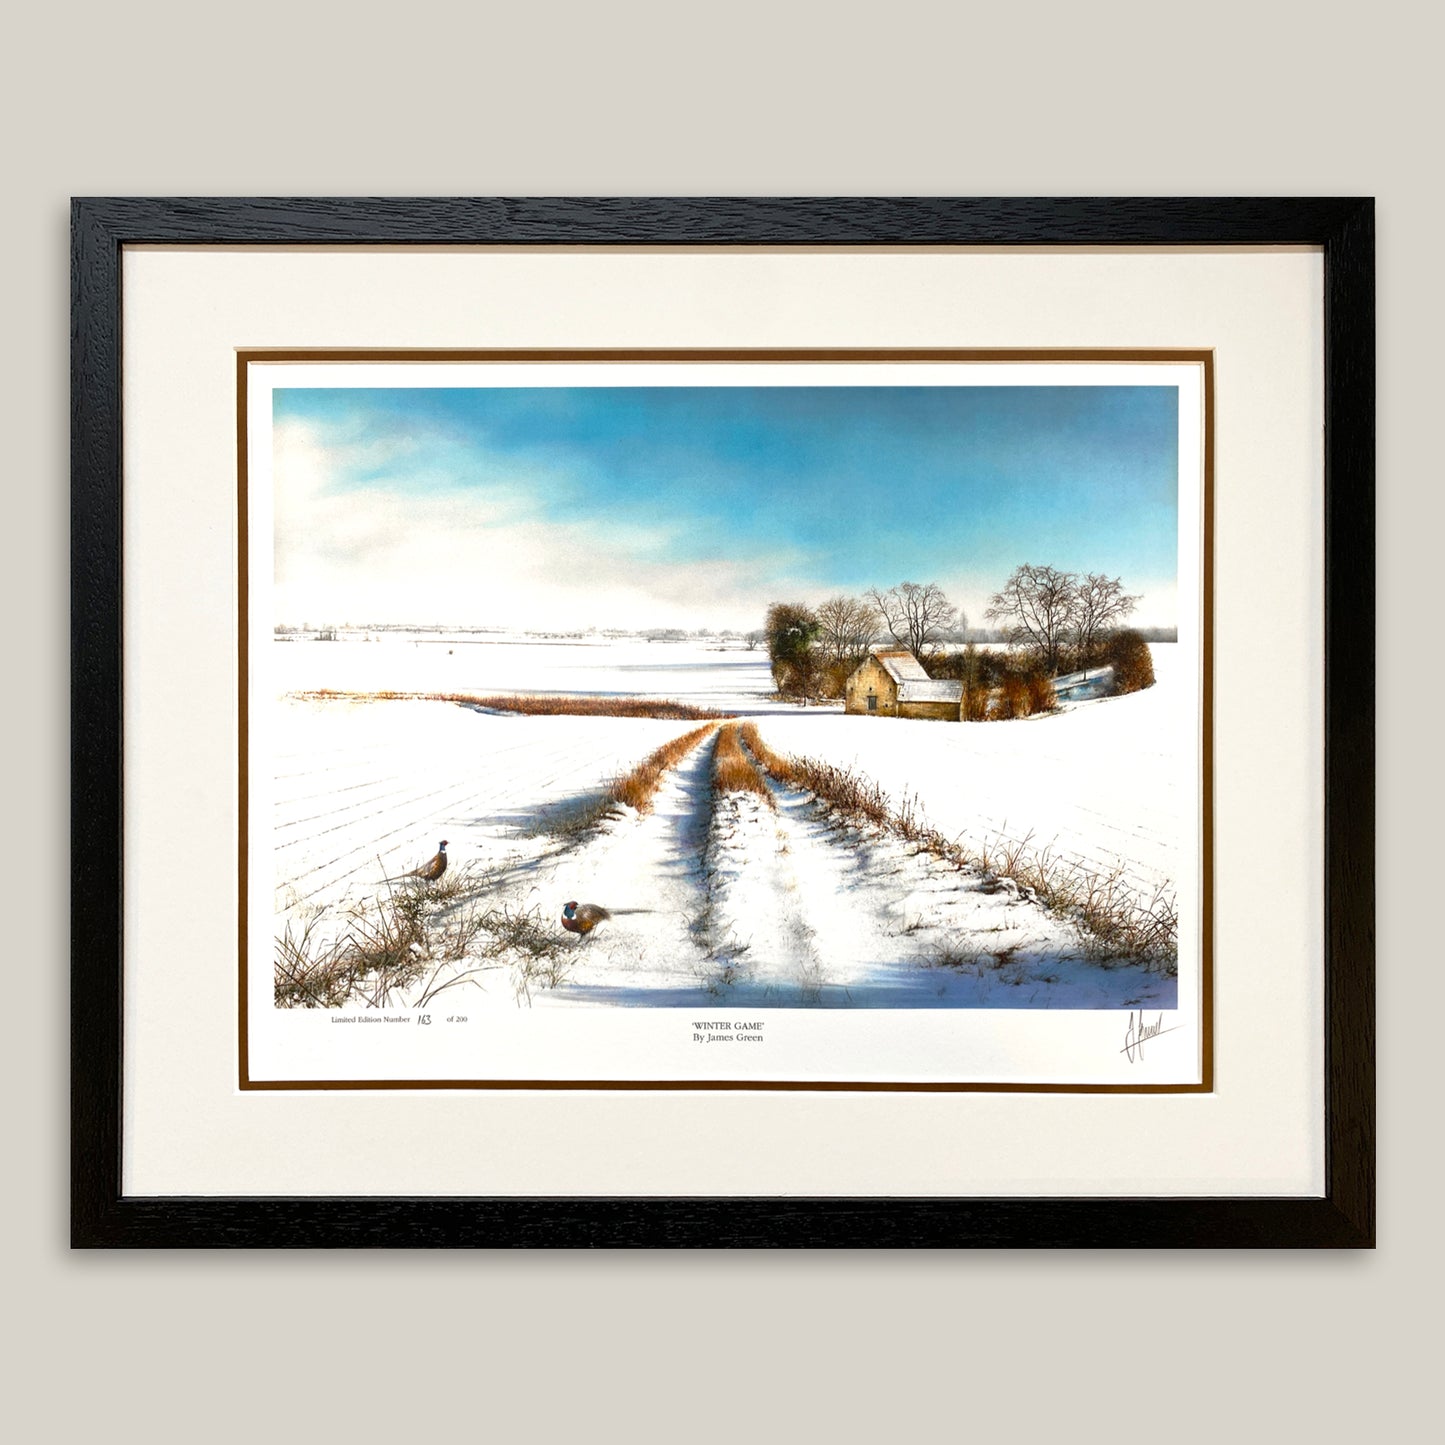 Winter Game Limited Edition Print